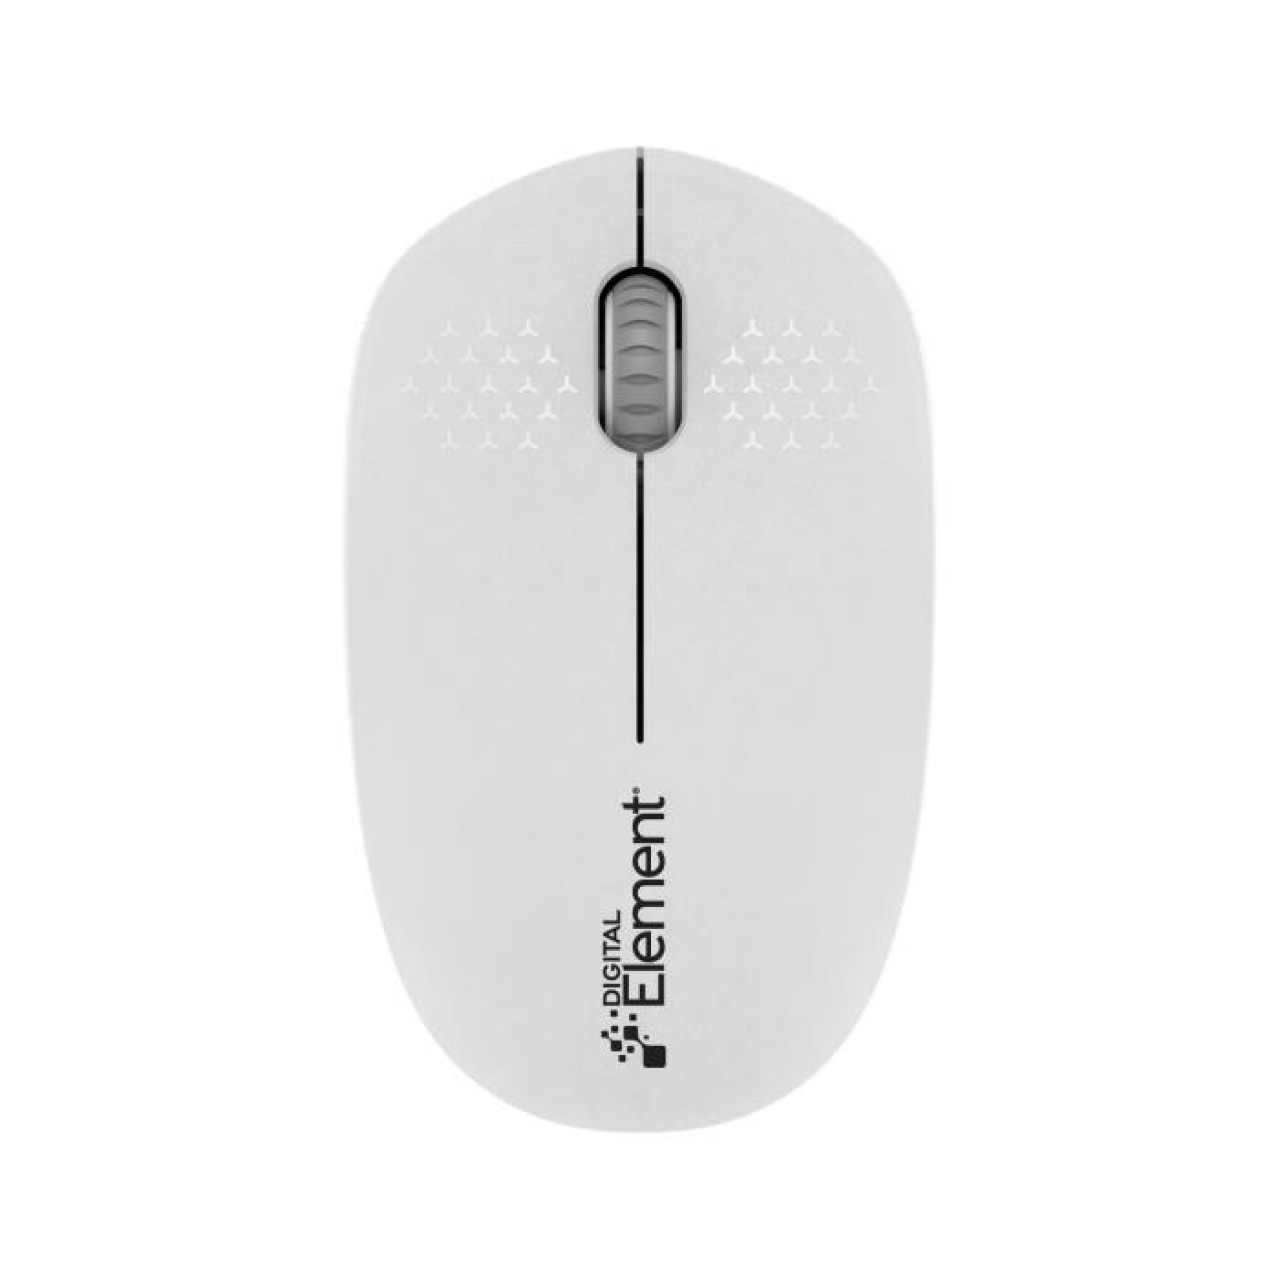 Mouse Wireless Element MS-190W